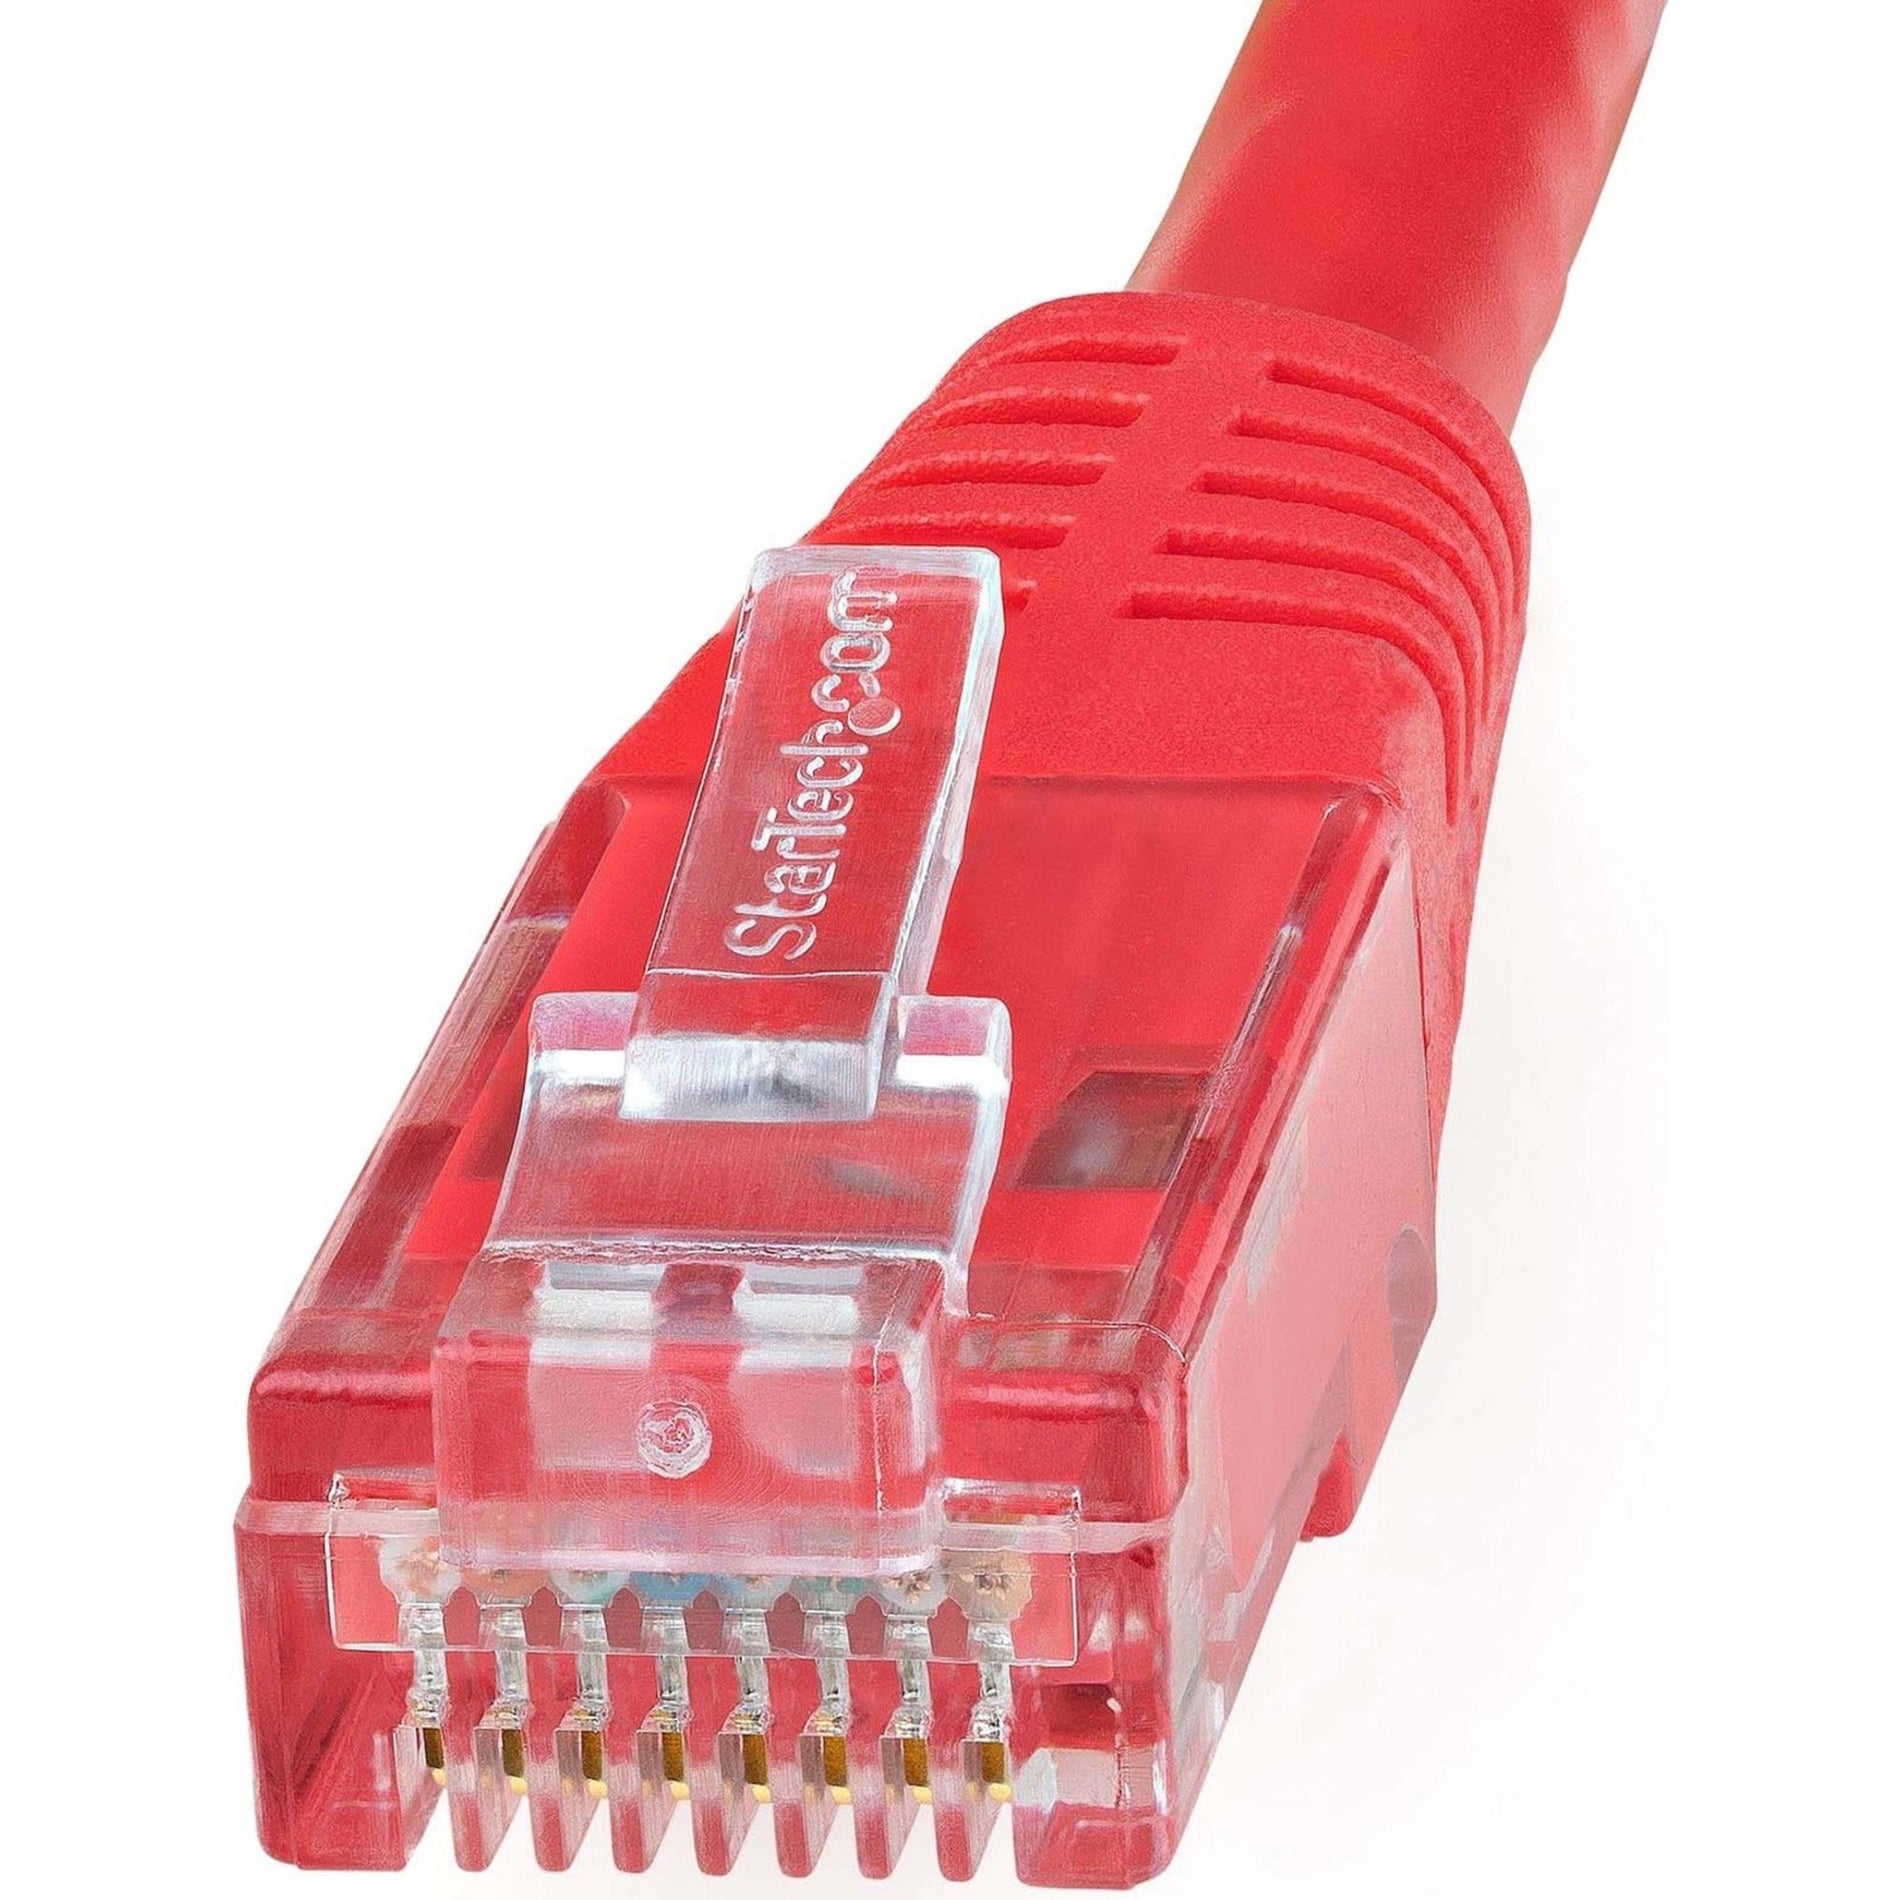 StarTech.com C6PATCH20RD 20ft Red Cat6 UTP Patch Cable ETL Verified, PoE, Stranded, 10 Gbit/s, RJ-45 Network - Male